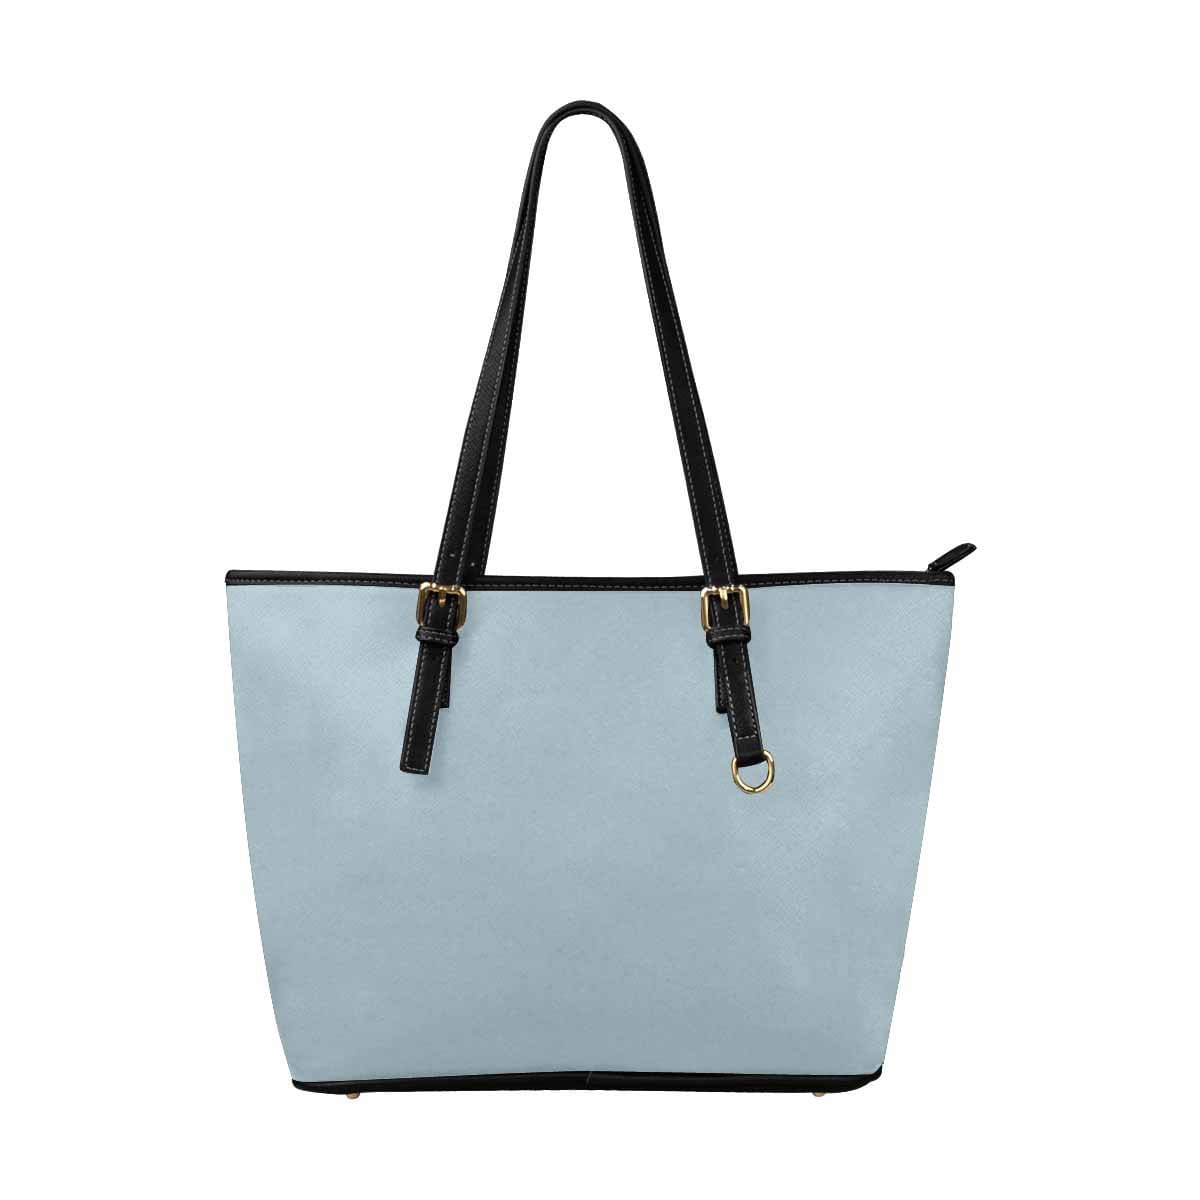 Large Leather Tote Shoulder Bag - Pastel Blue - Bags | Leather Tote Bags